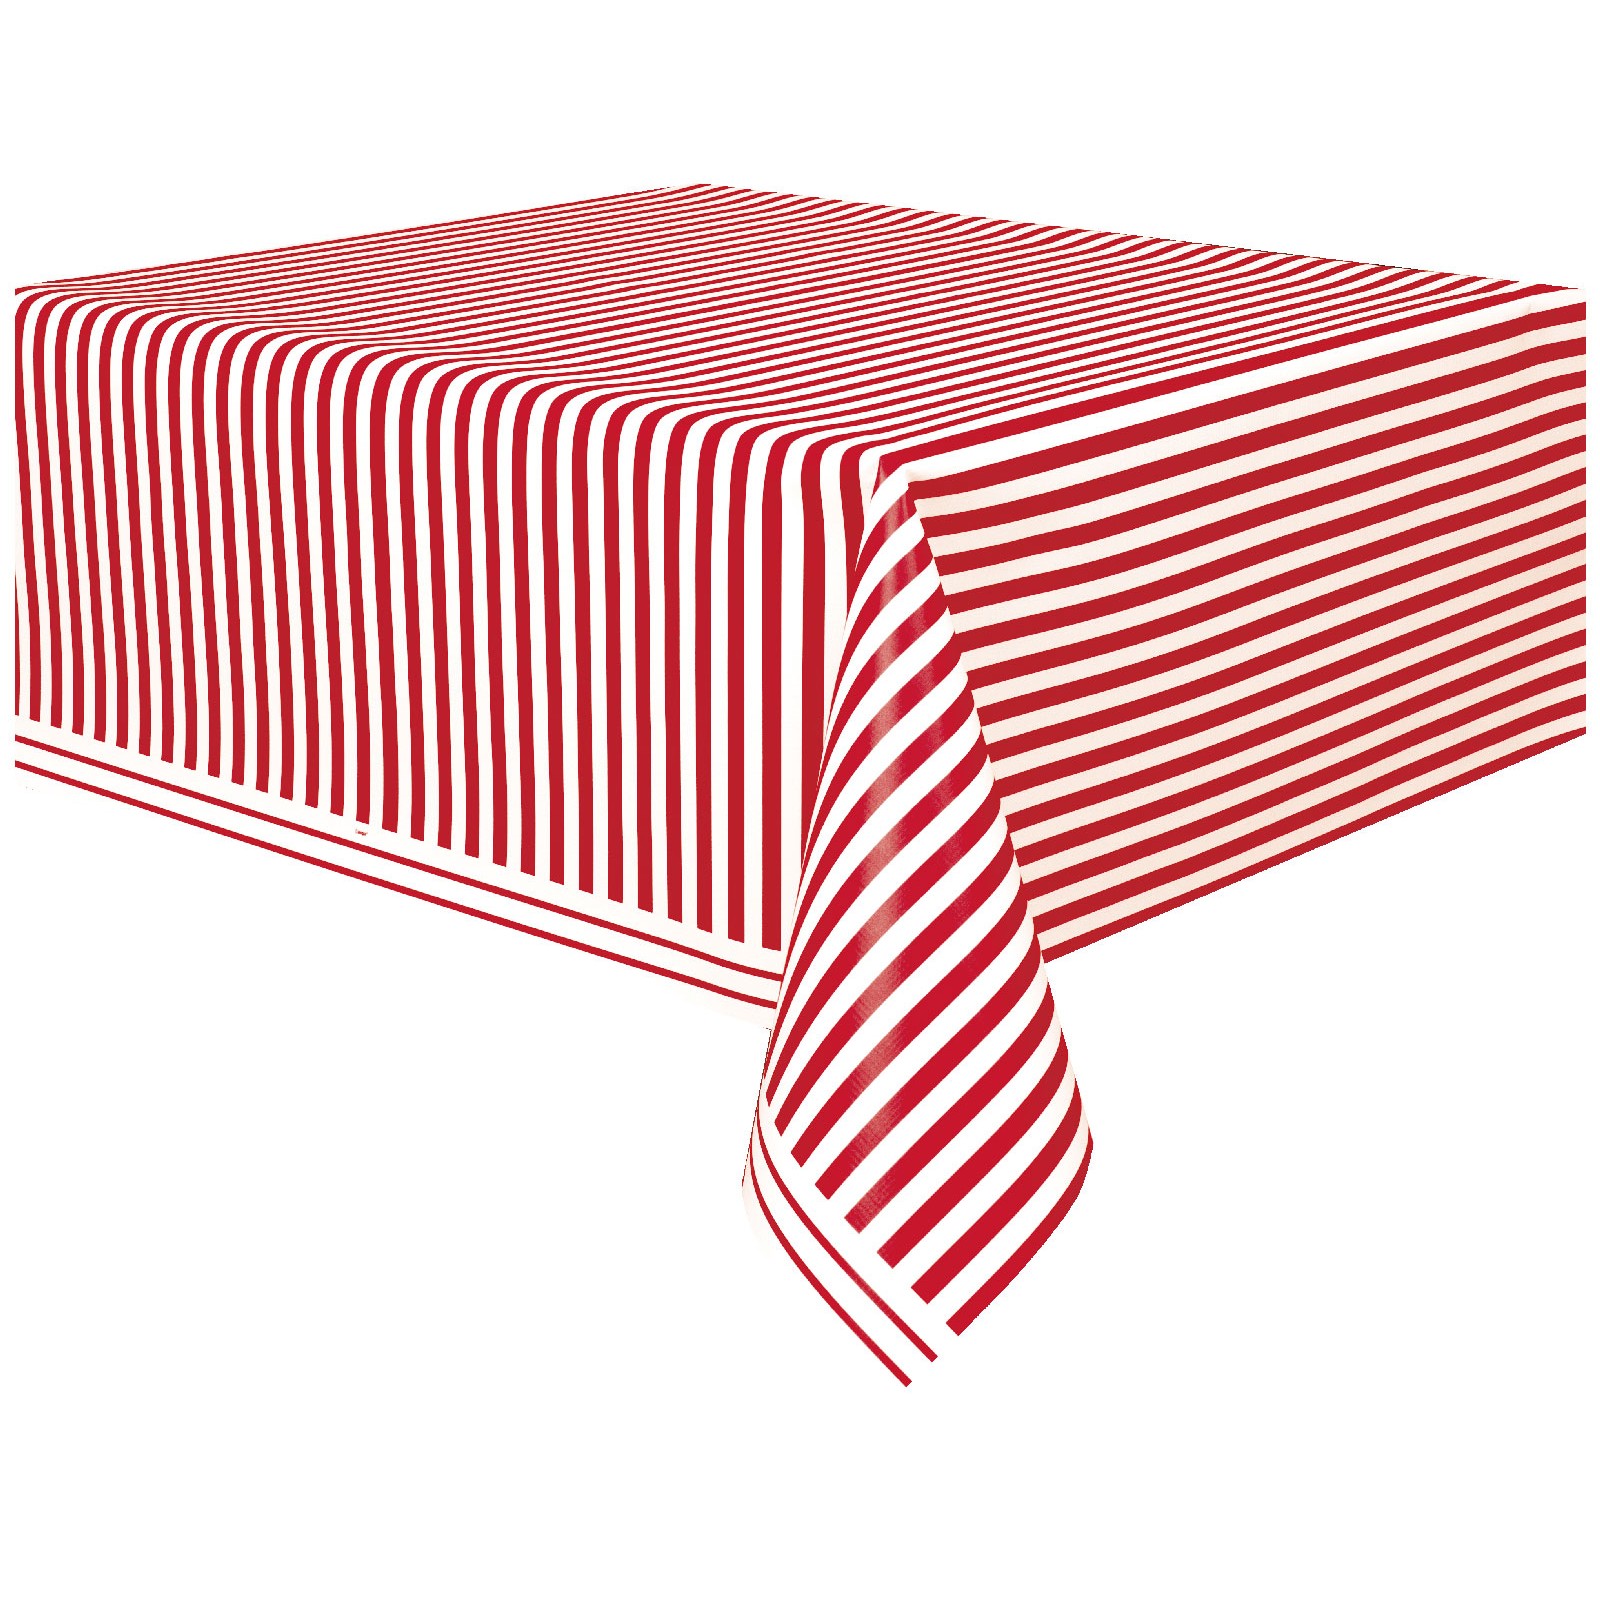 Red Striped Plastic Party Tablecloth, 108 x 54in - image 1 of 3